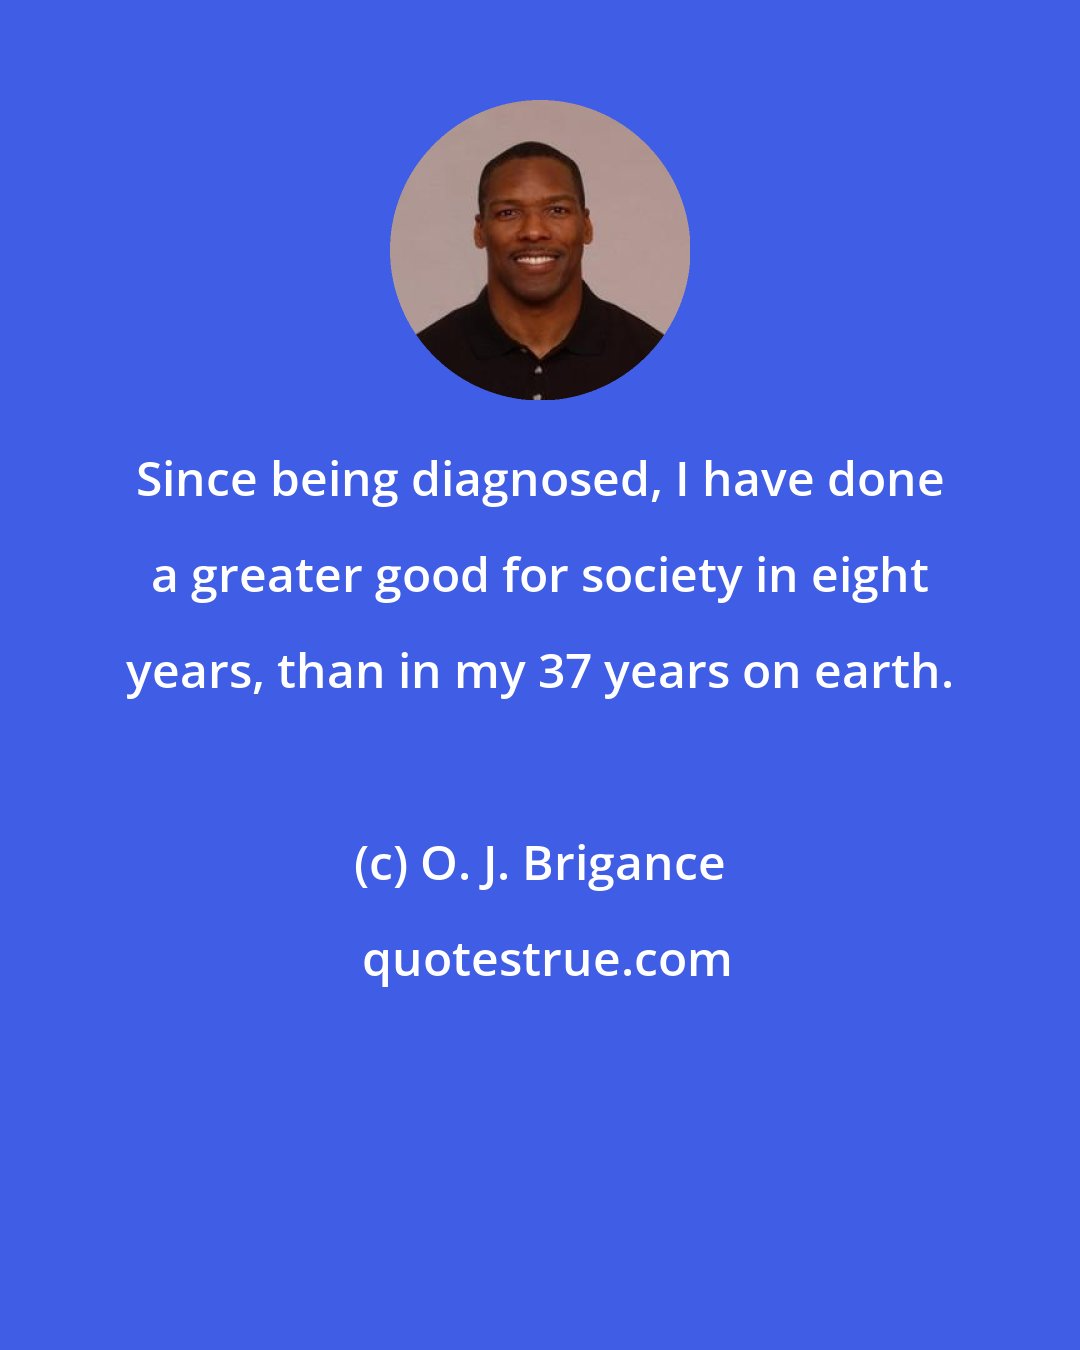 O. J. Brigance: Since being diagnosed, I have done a greater good for society in eight years, than in my 37 years on earth.